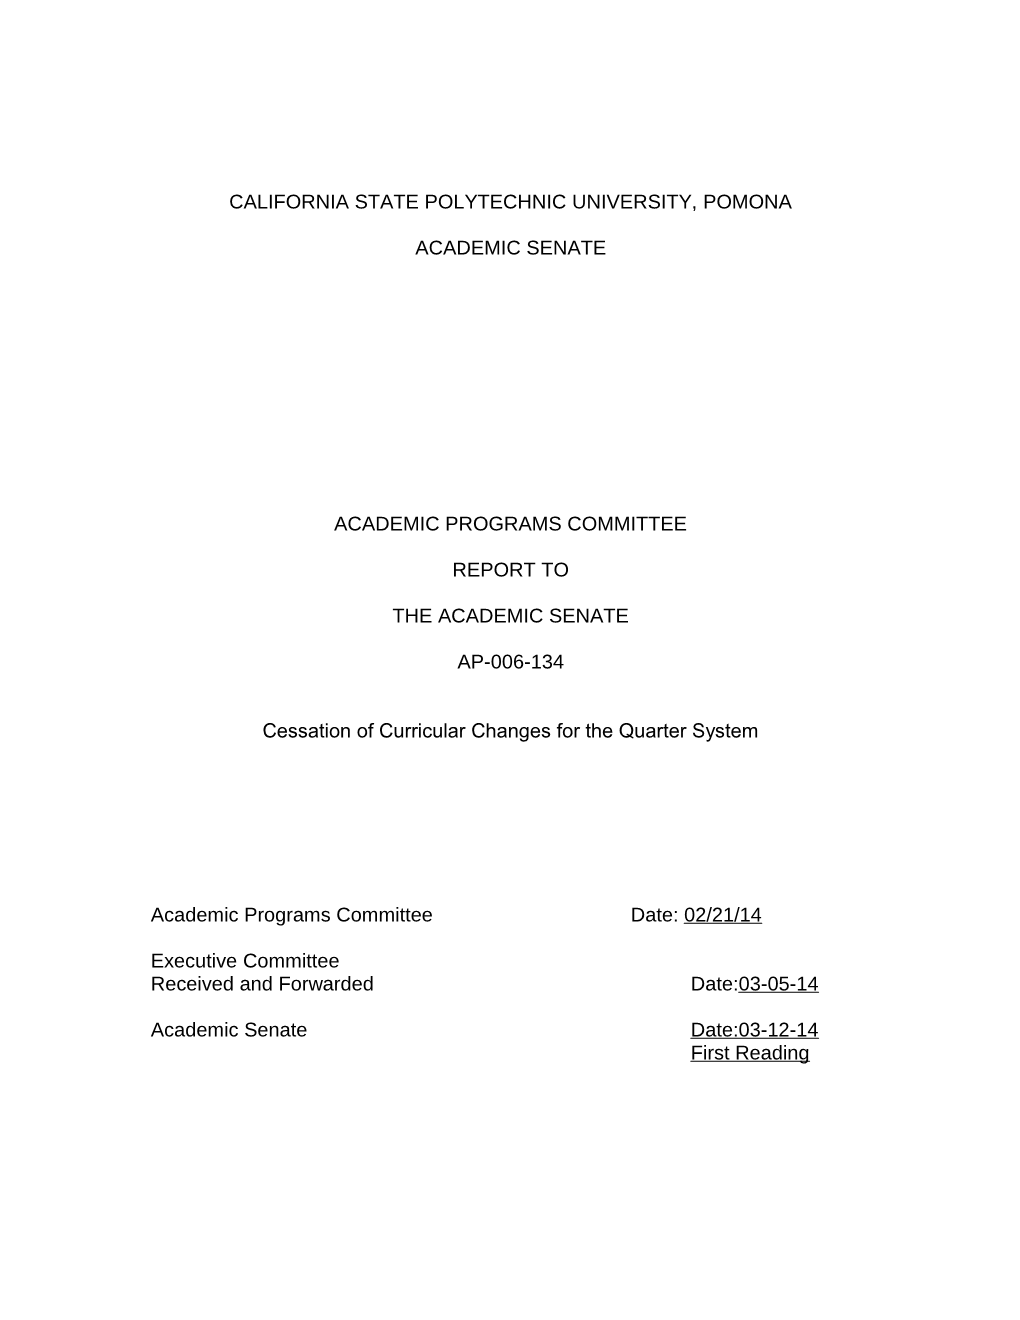 AP-006-134, Cessation of Curricular Changes for the Quarter System 1